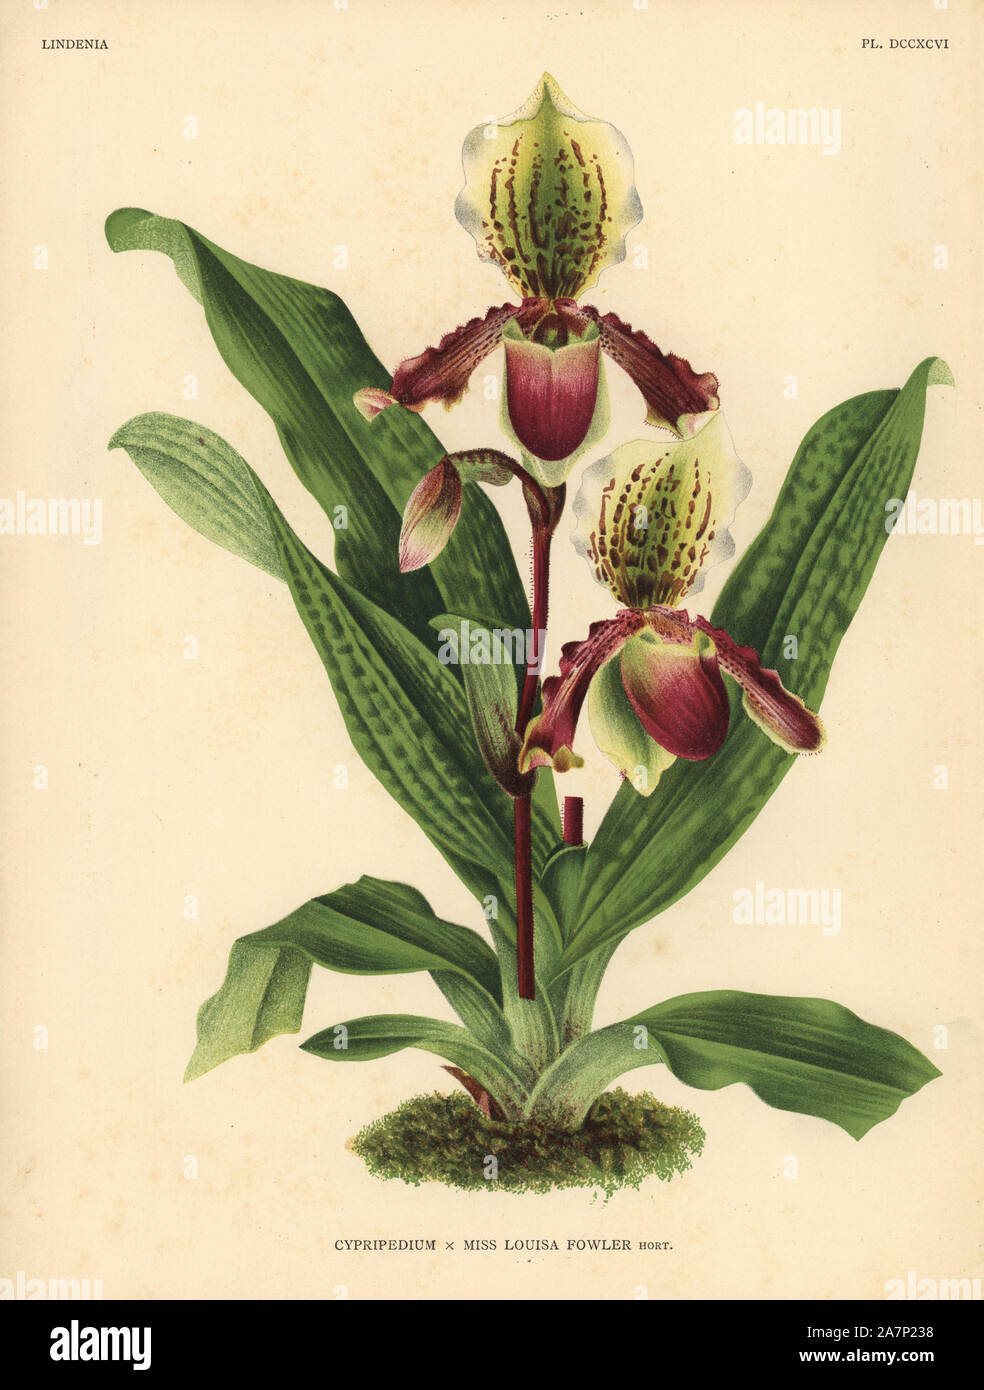 Miss Louisa Fowler's Cypripedium orchid. Botanical illustration in chromolithograph from Lucien Linden's 'Lindenia, Iconographie des Orchidees,' Brussels, 1903. Stock Photo